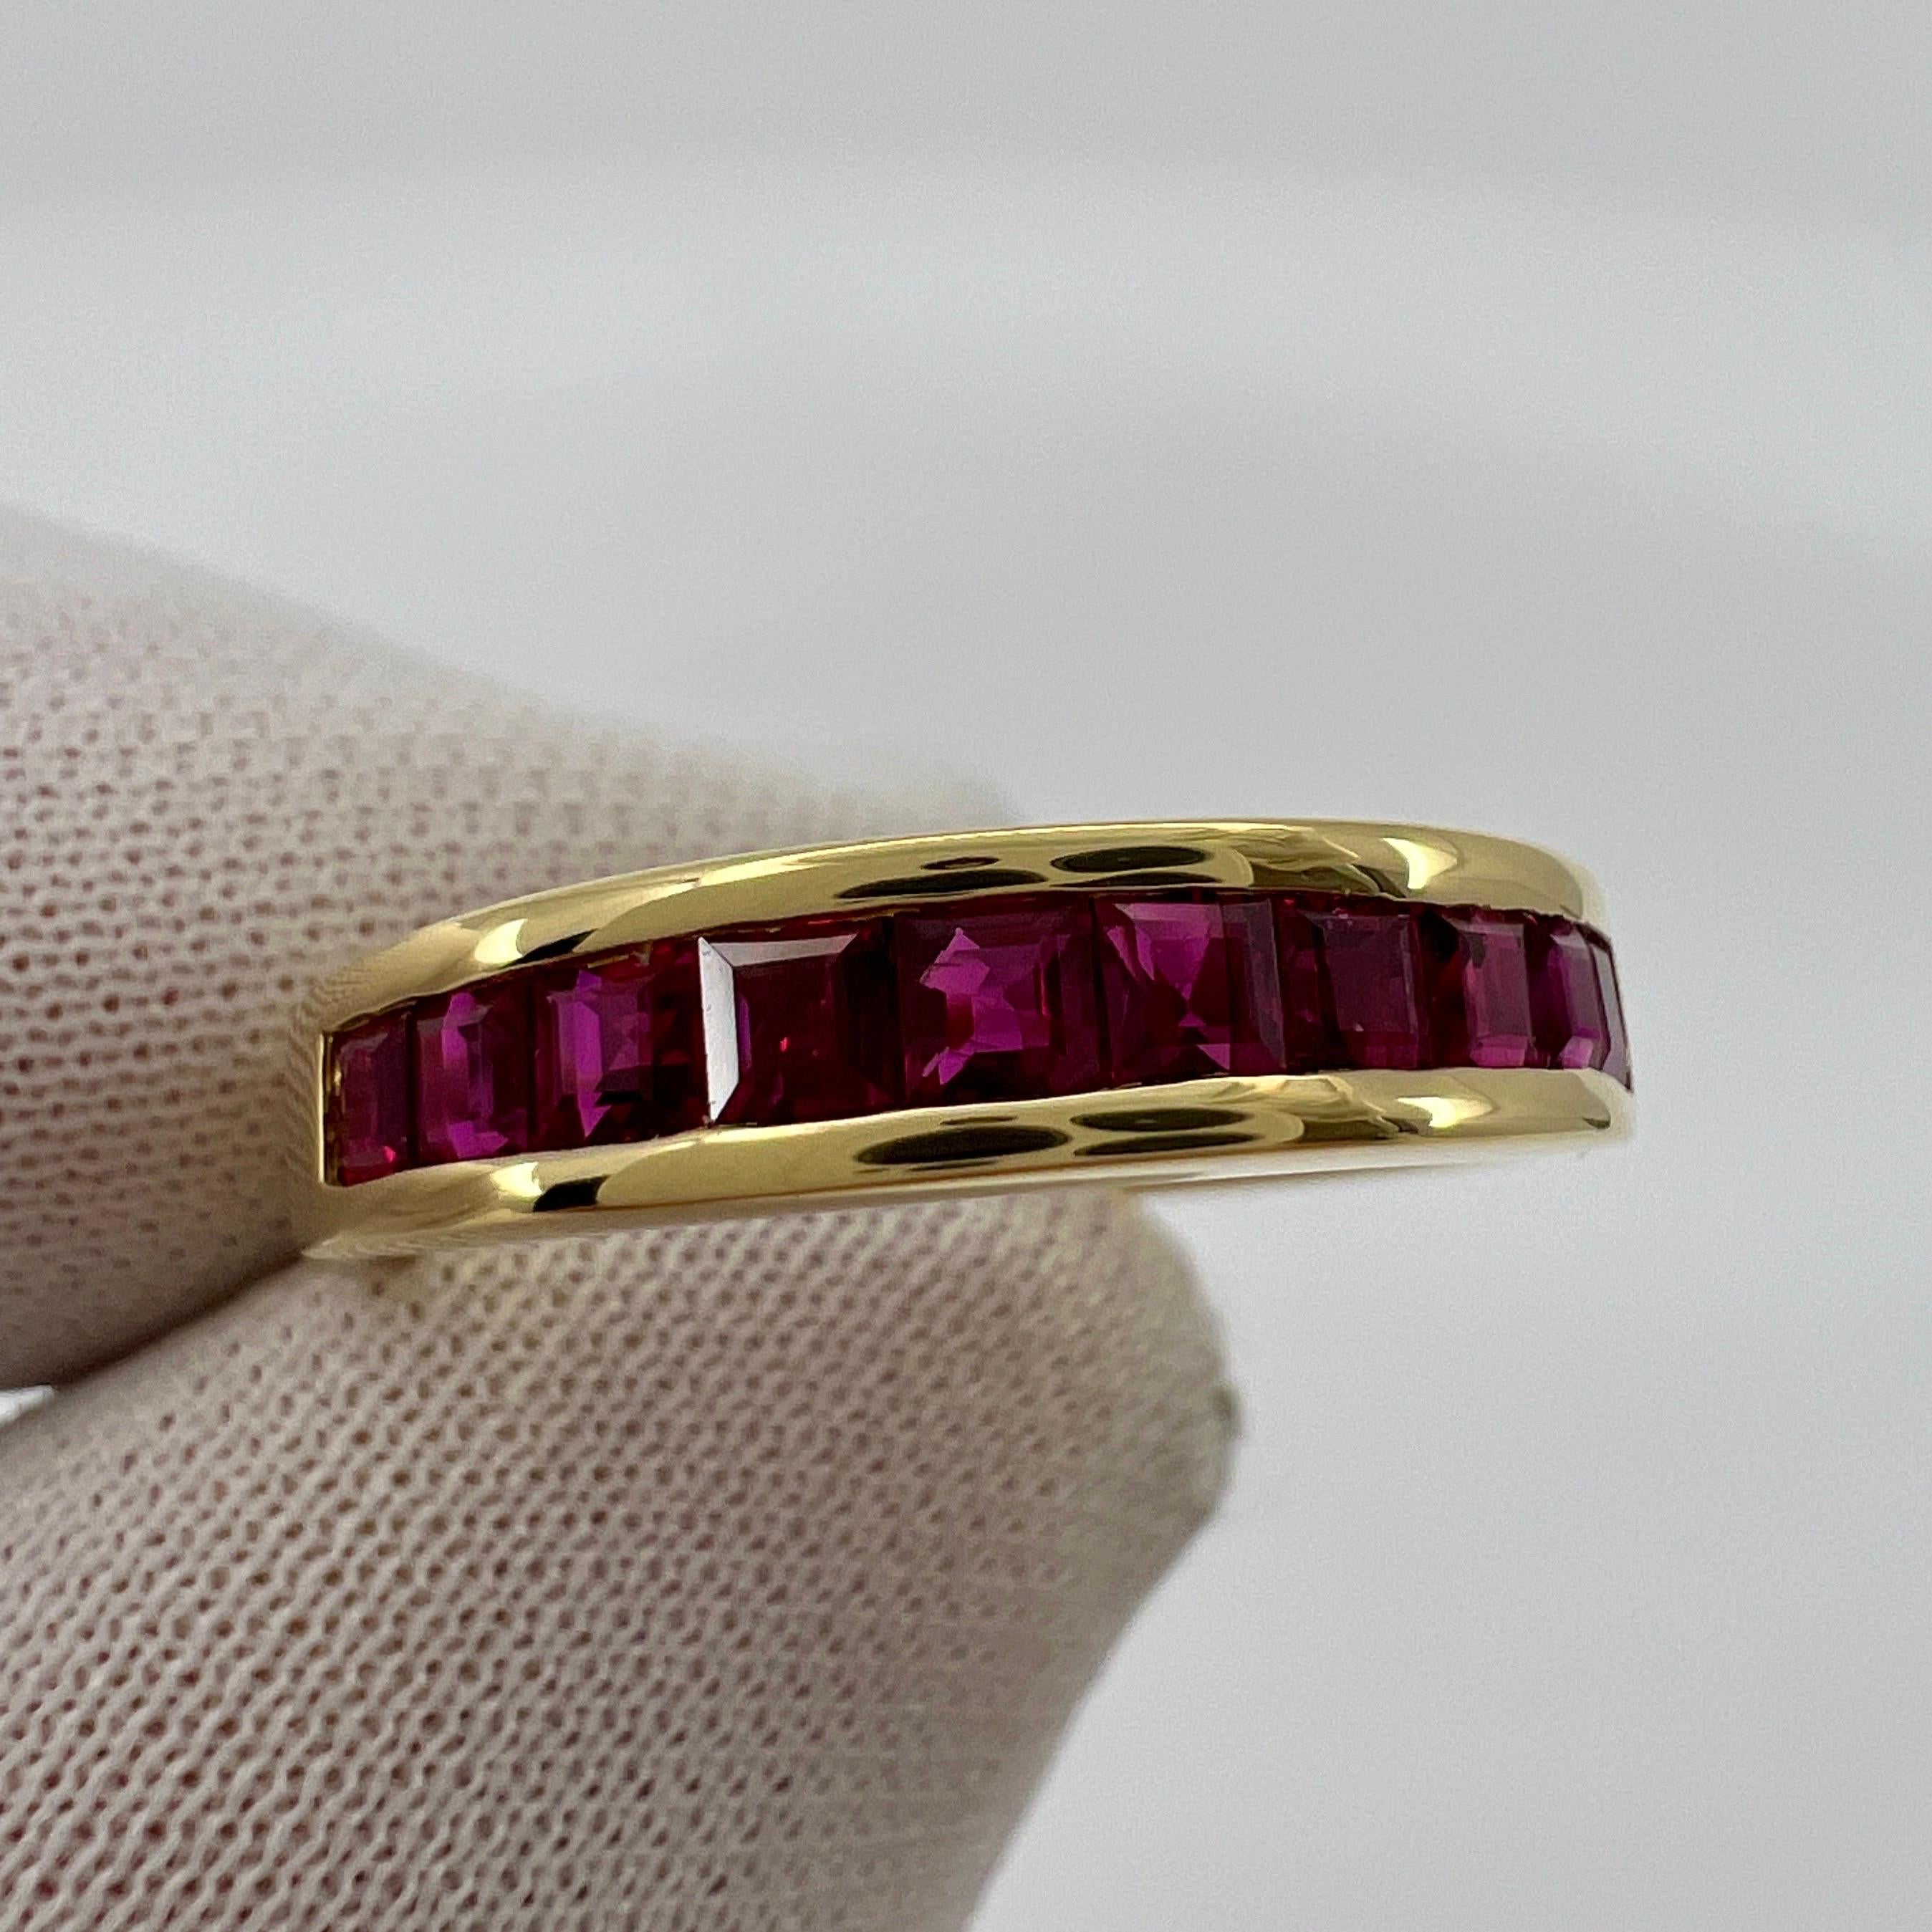 Tiffany & Co. Red Ruby Square Princess Cut 18k Yellow Gold Eternity Band Ring 7